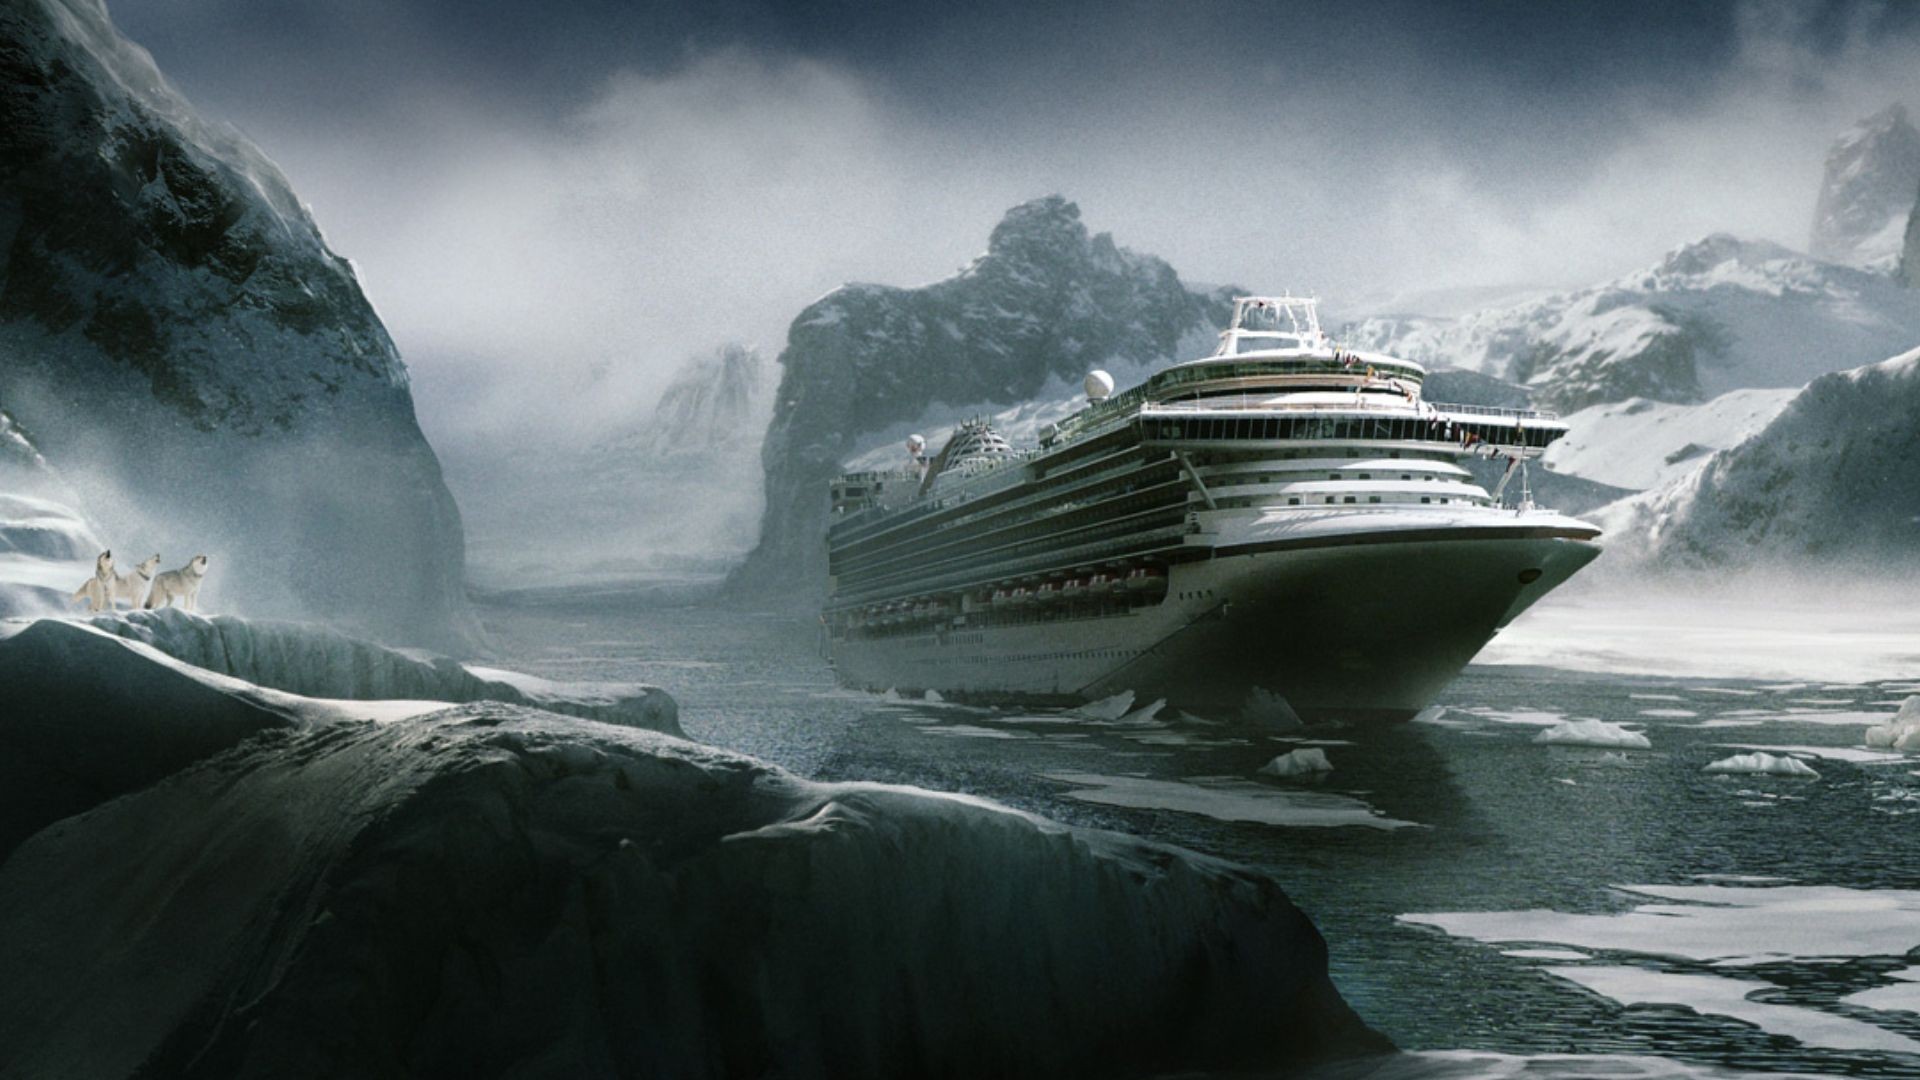 General 1920x1080 artwork mountains ship cruise ship vehicle digital art frontal view water mist ice snow wolf animals